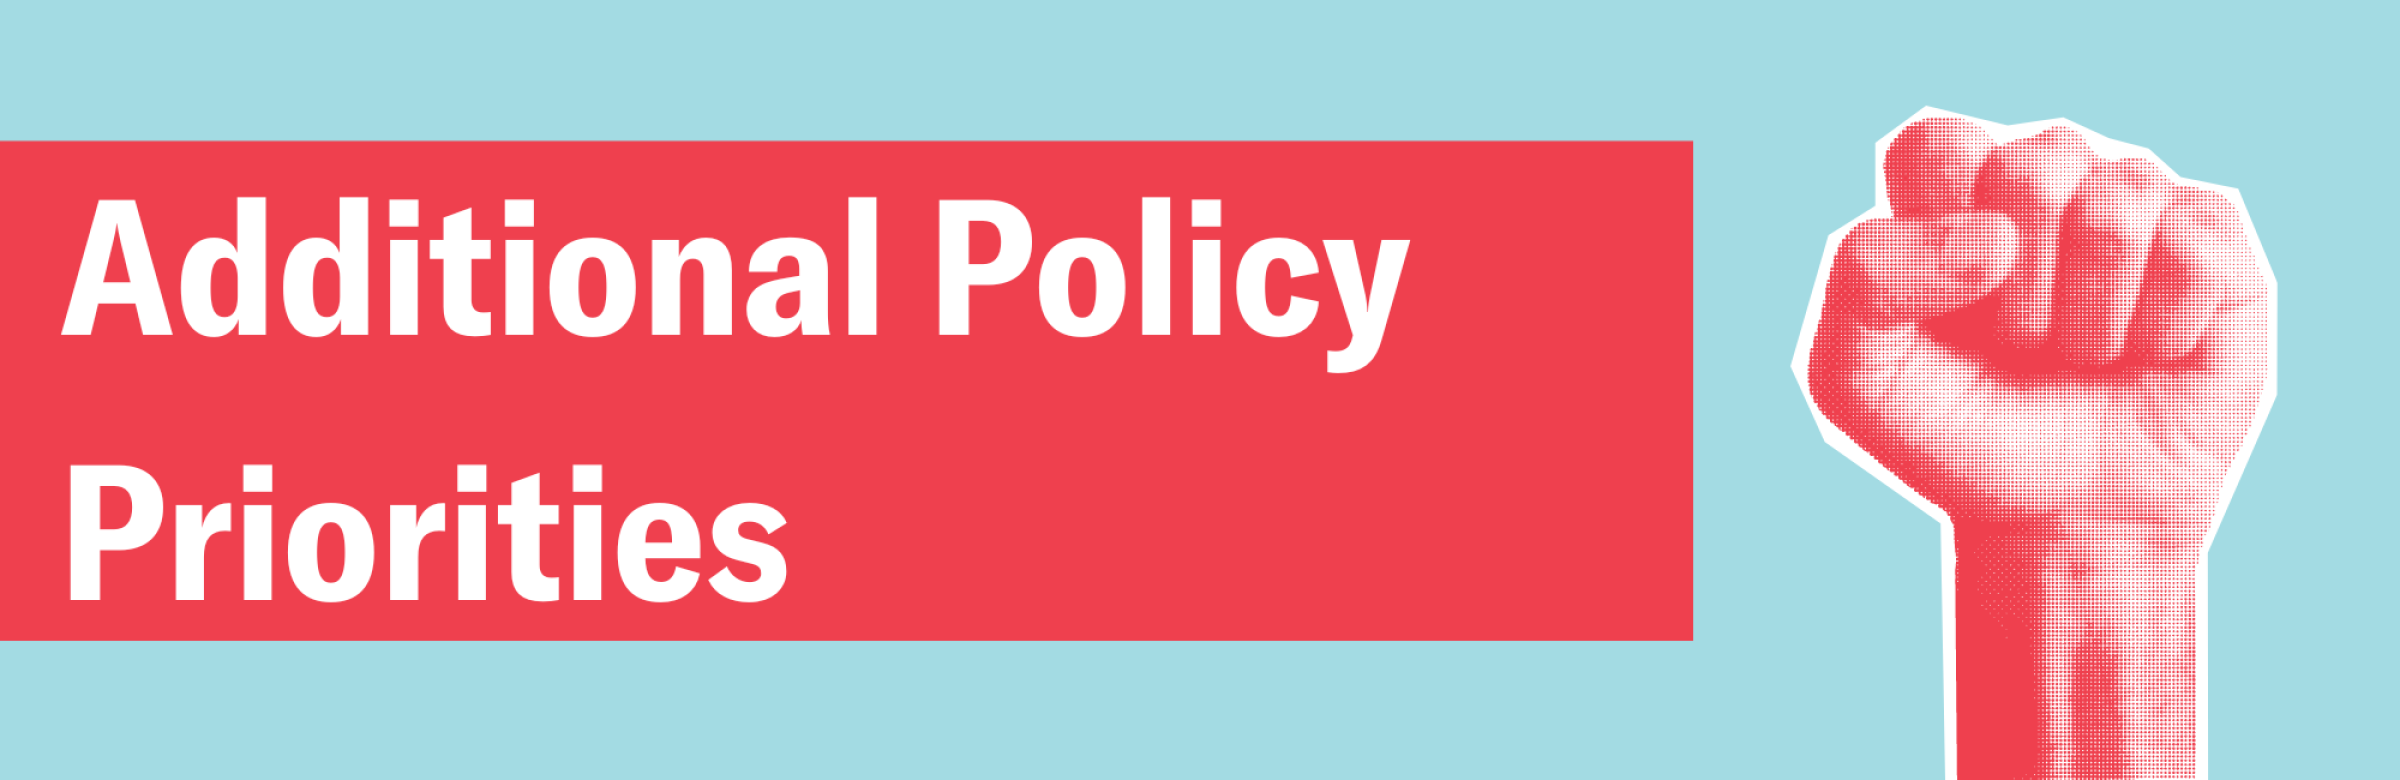 Additional Policy Priorities